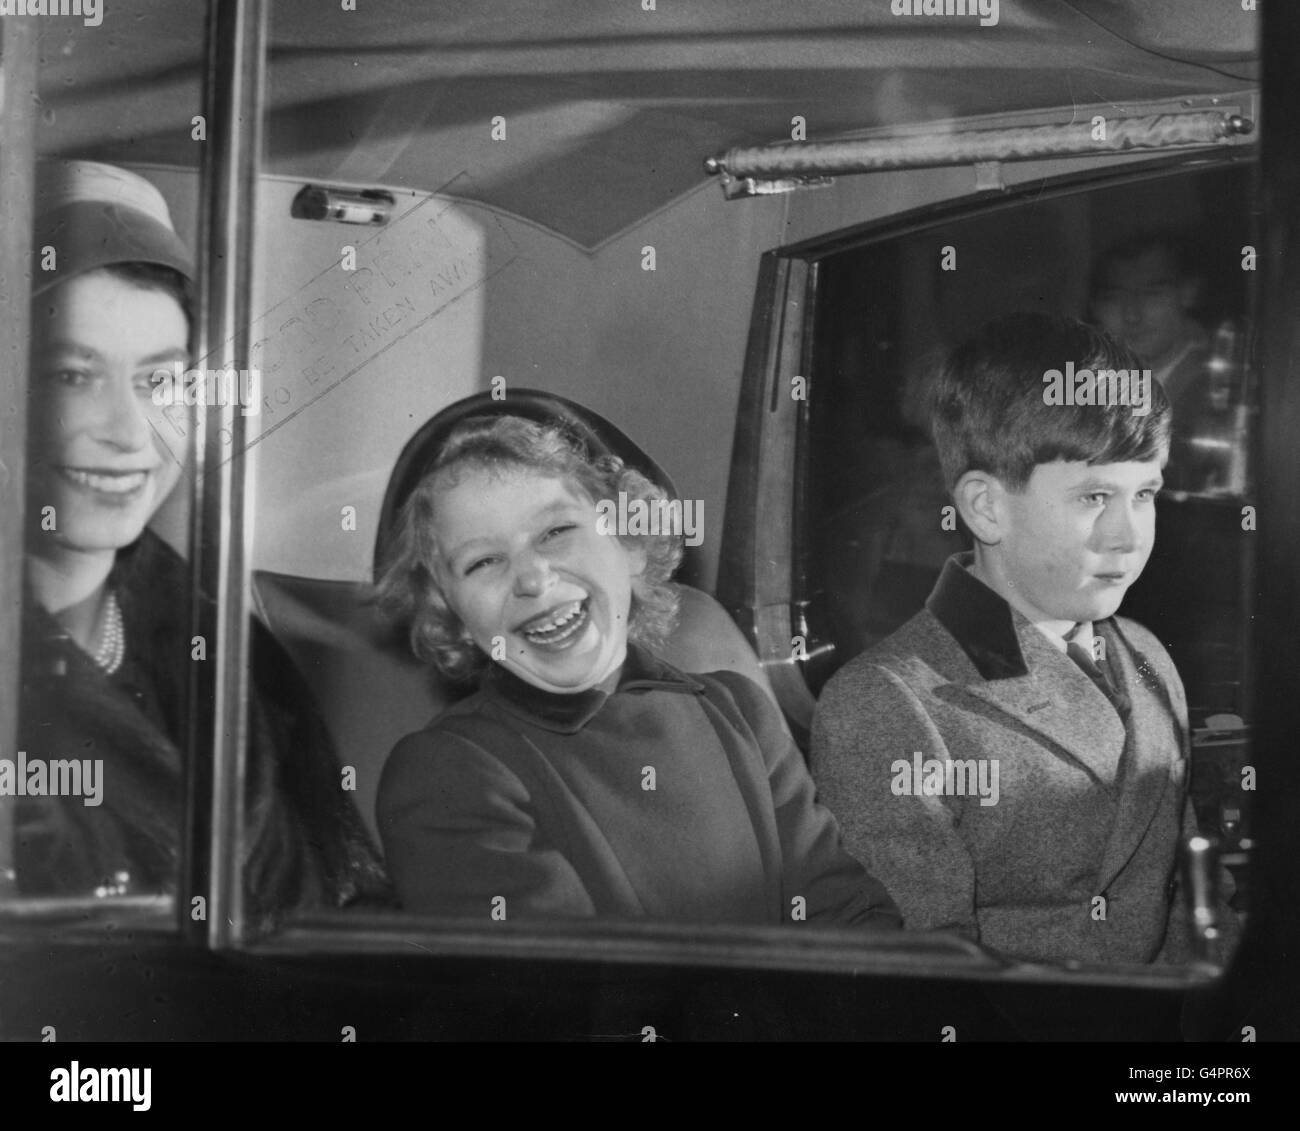 A laughing Princess Anne sits with her mother, Queen Elizabeth II, and Prince Charles in a car taking them from Buckingham Palace to King's Cross Station, London. They were on their way to Sandringham for the Christmas holidays. Stock Photo